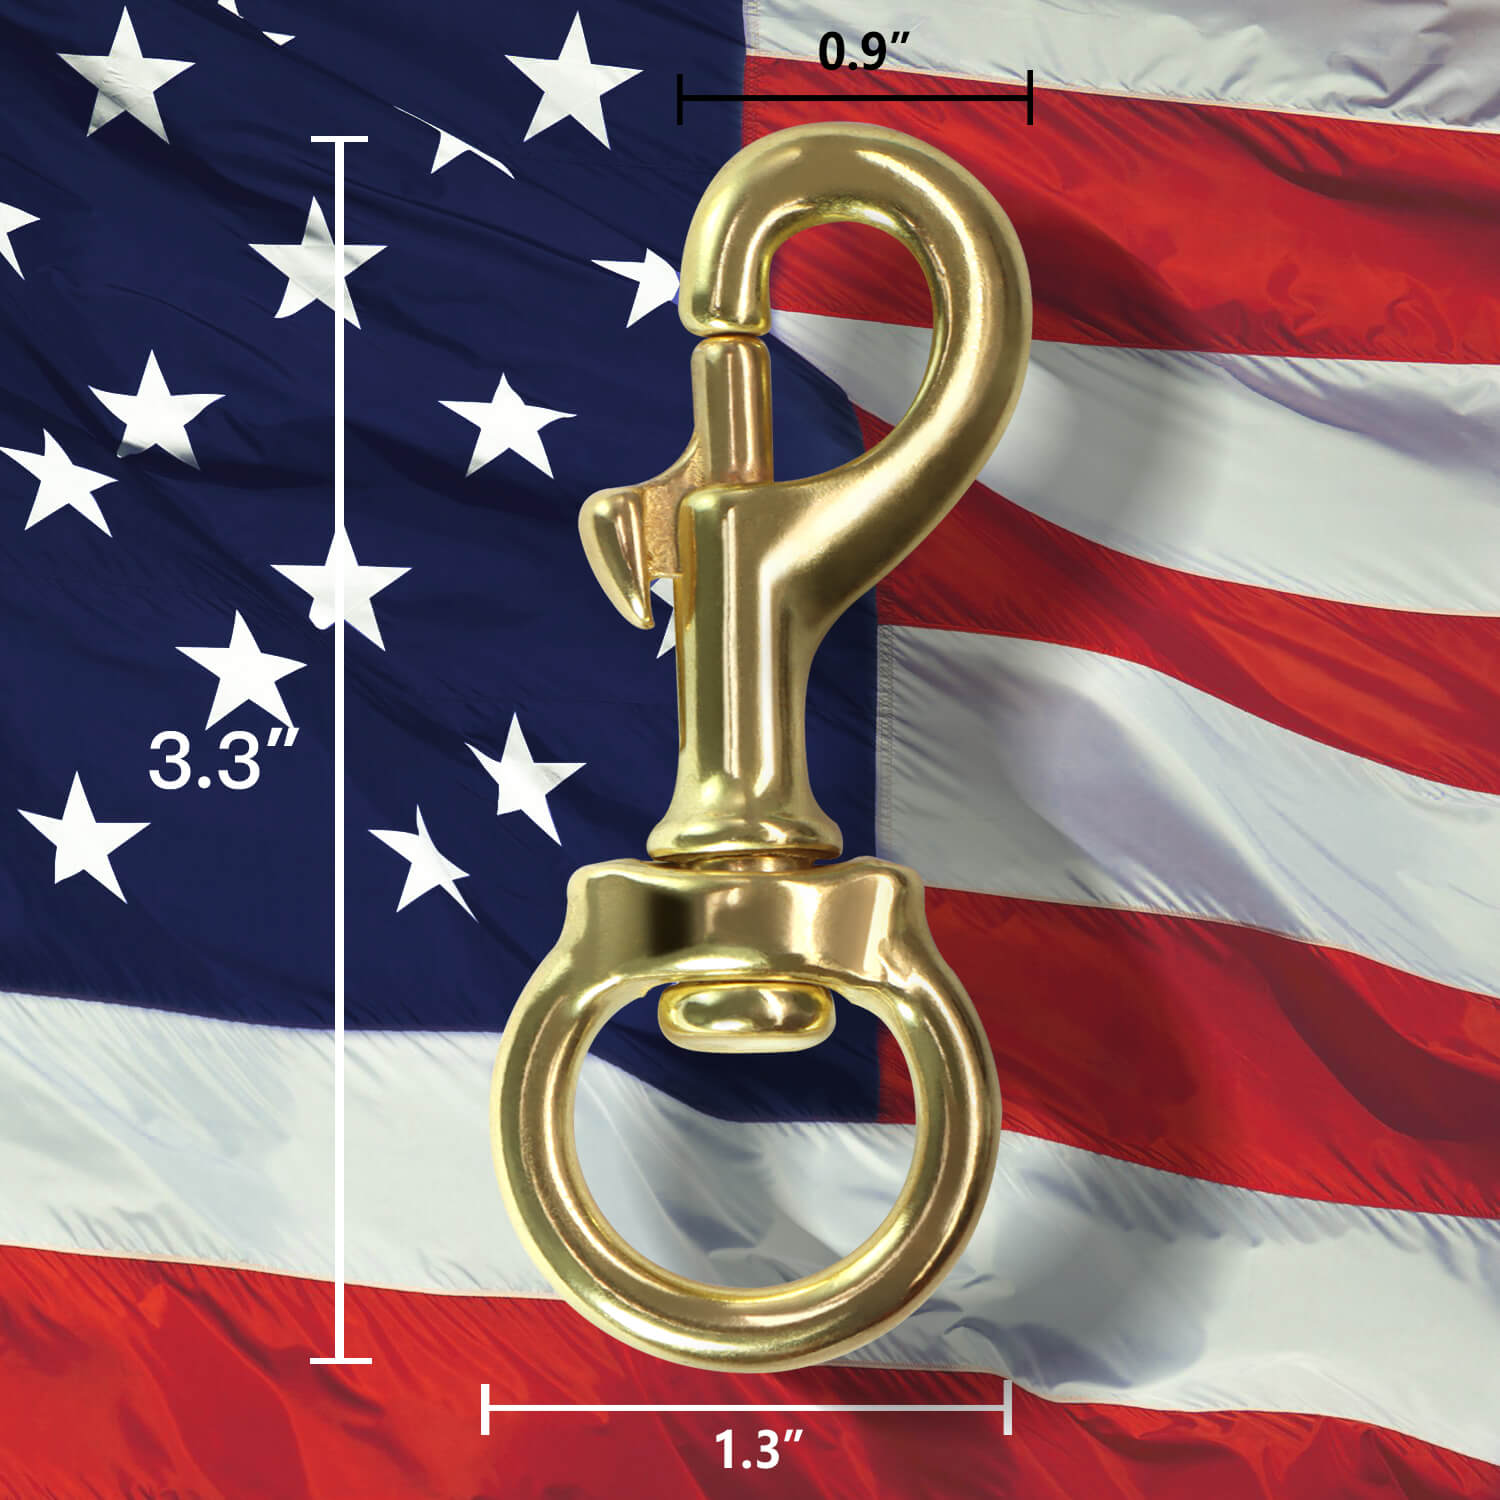 White Rubber Coated Brass Swivel Snap Hook - Anley Flags